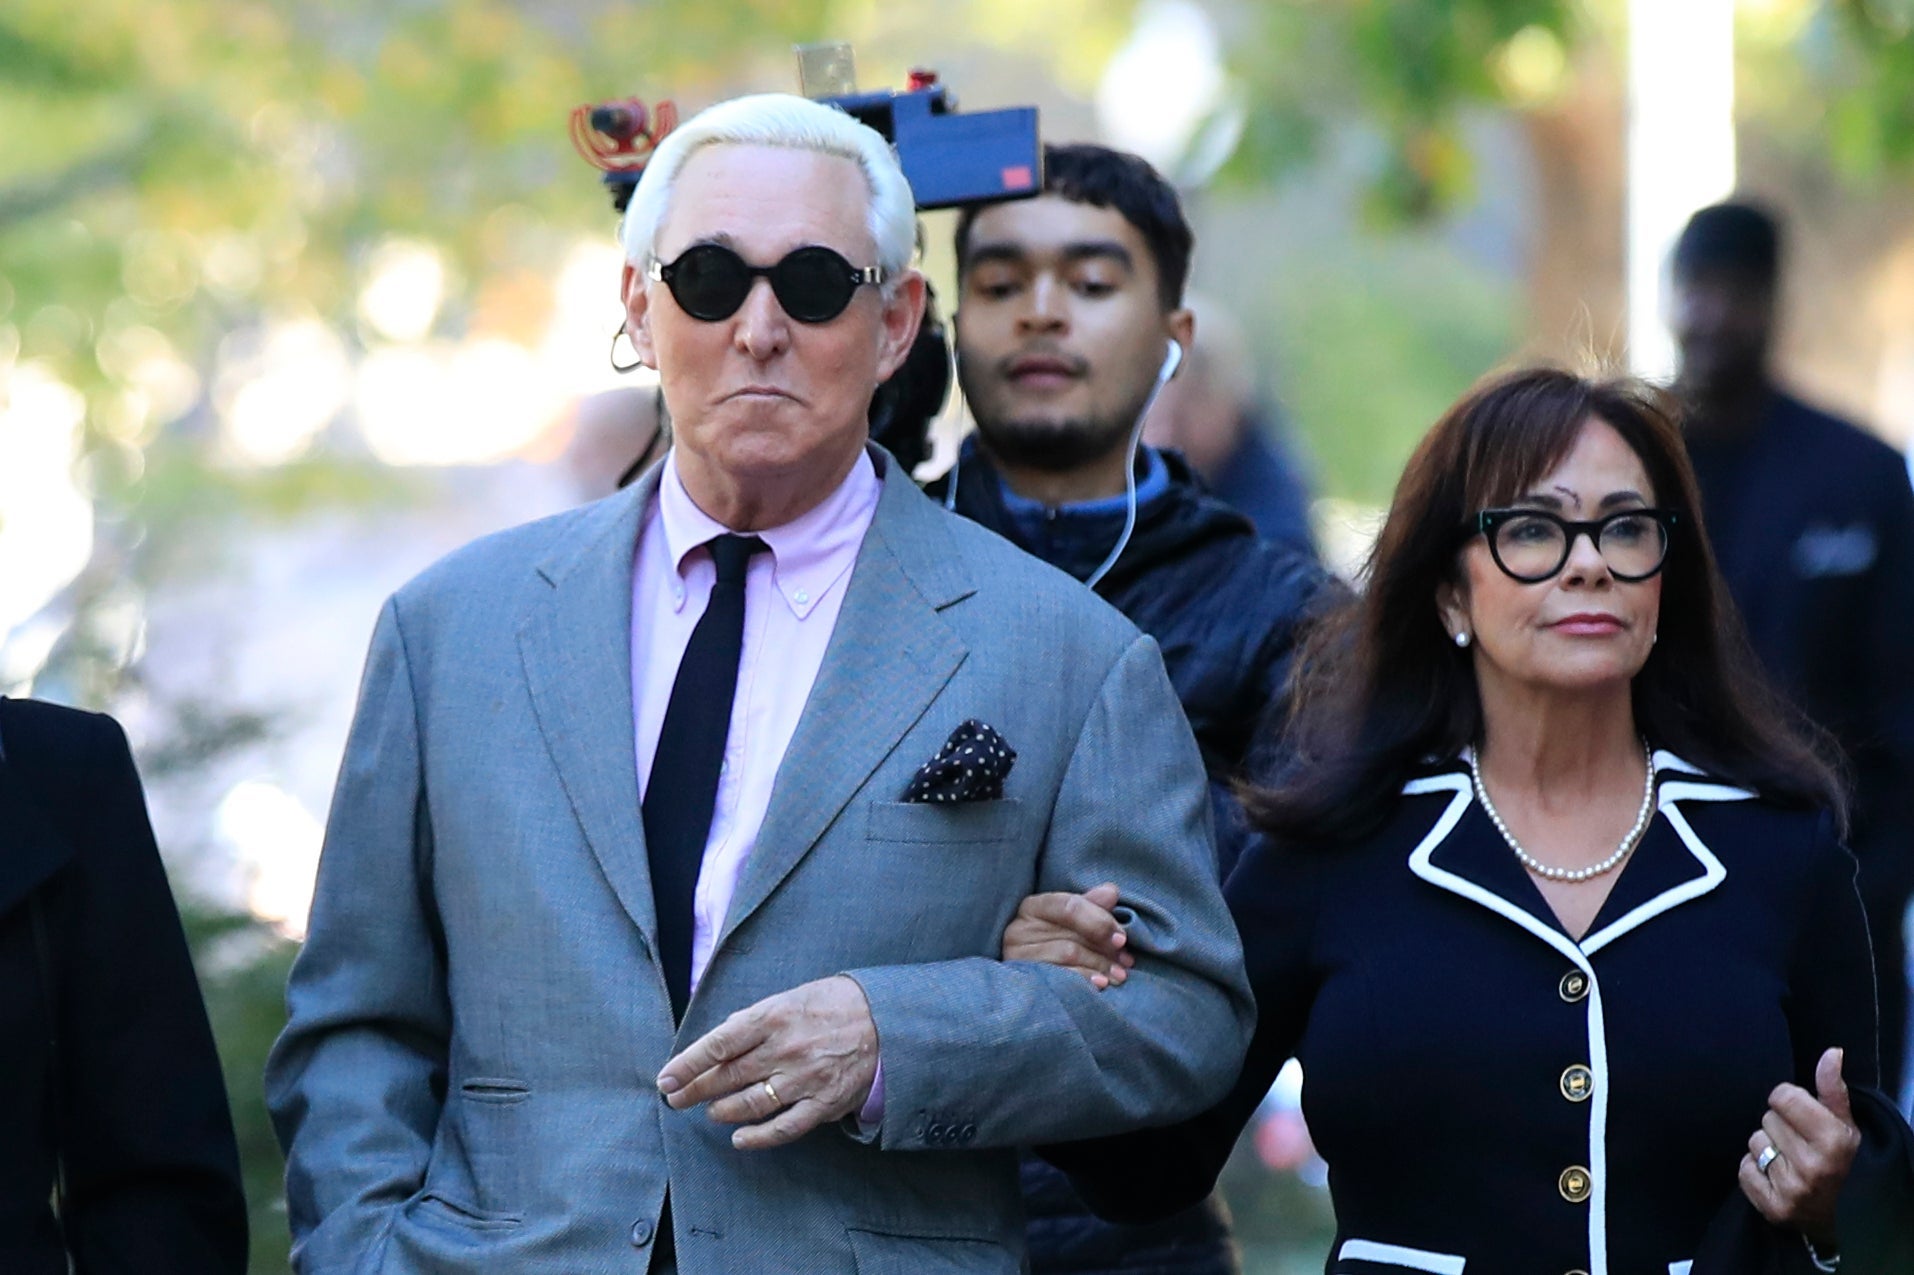 Roger Stone, flanked by his wife Nydia Stone, arrives at the federal court in Washington DC for the first day of his trial